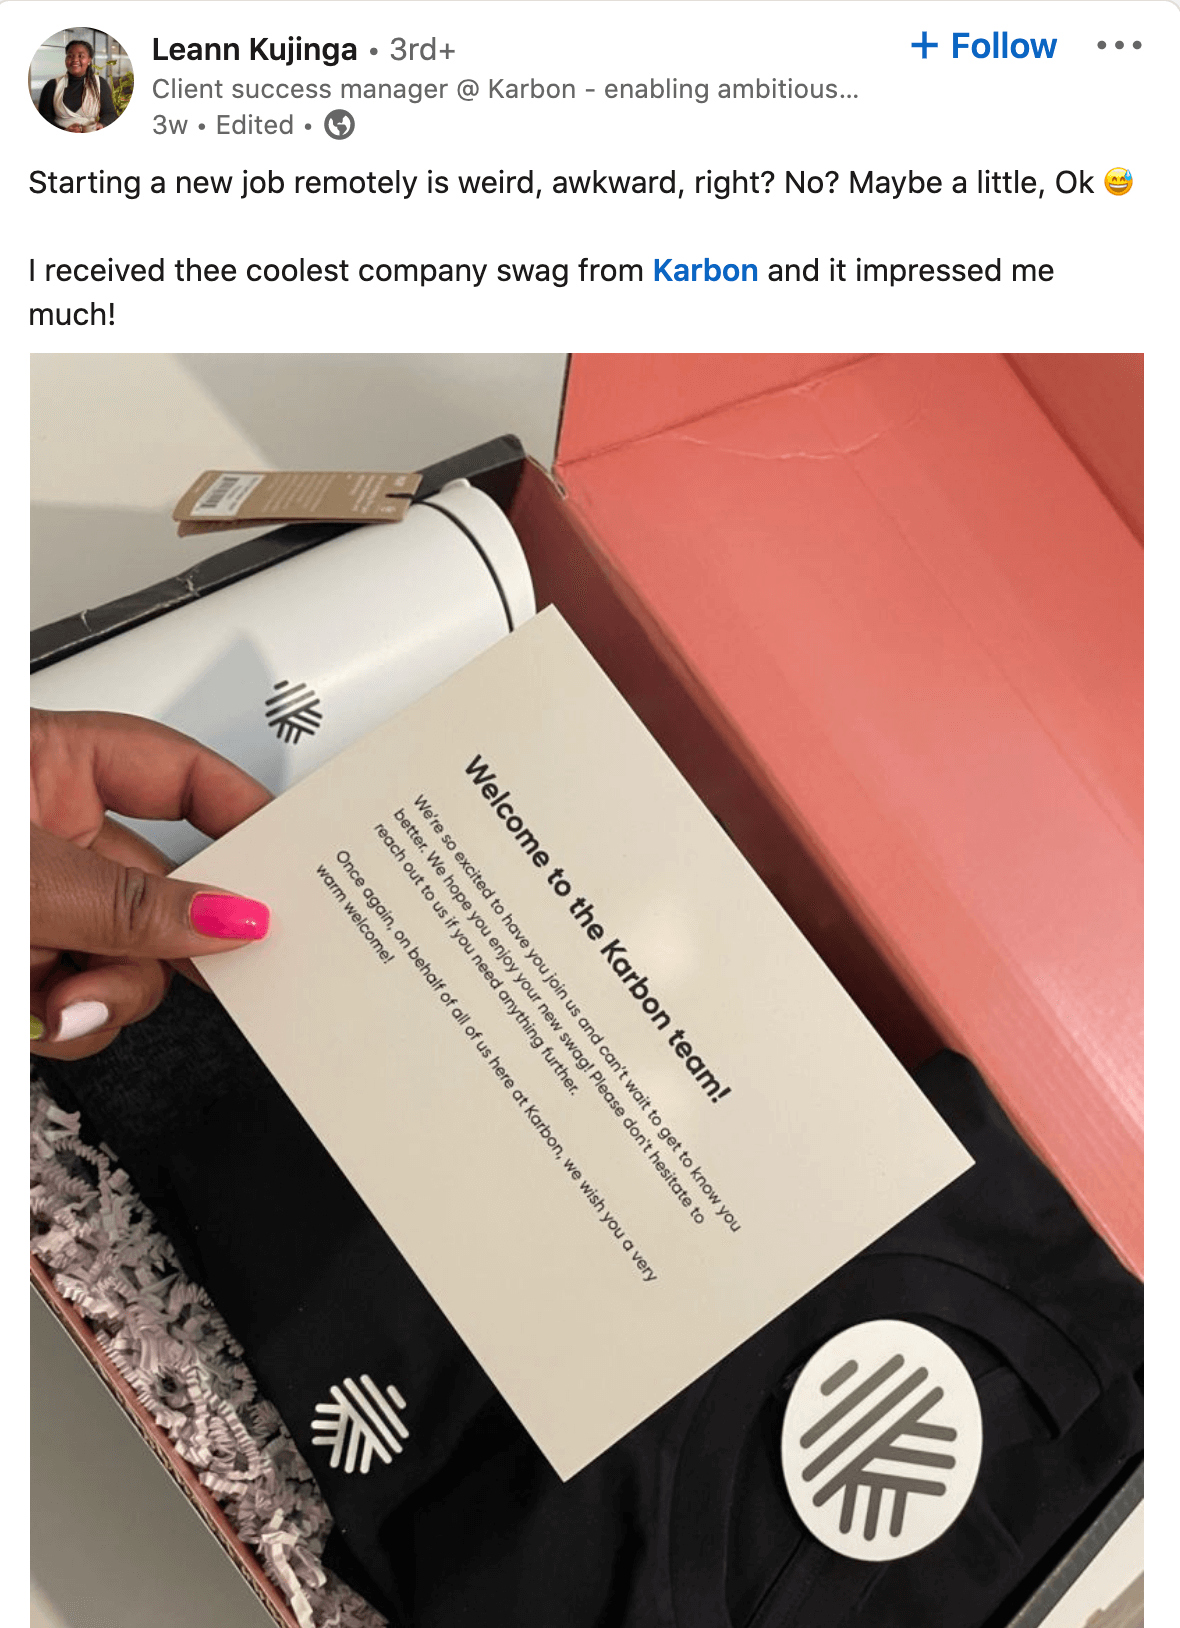 image of employee's LinkedIn post with photo of company swag